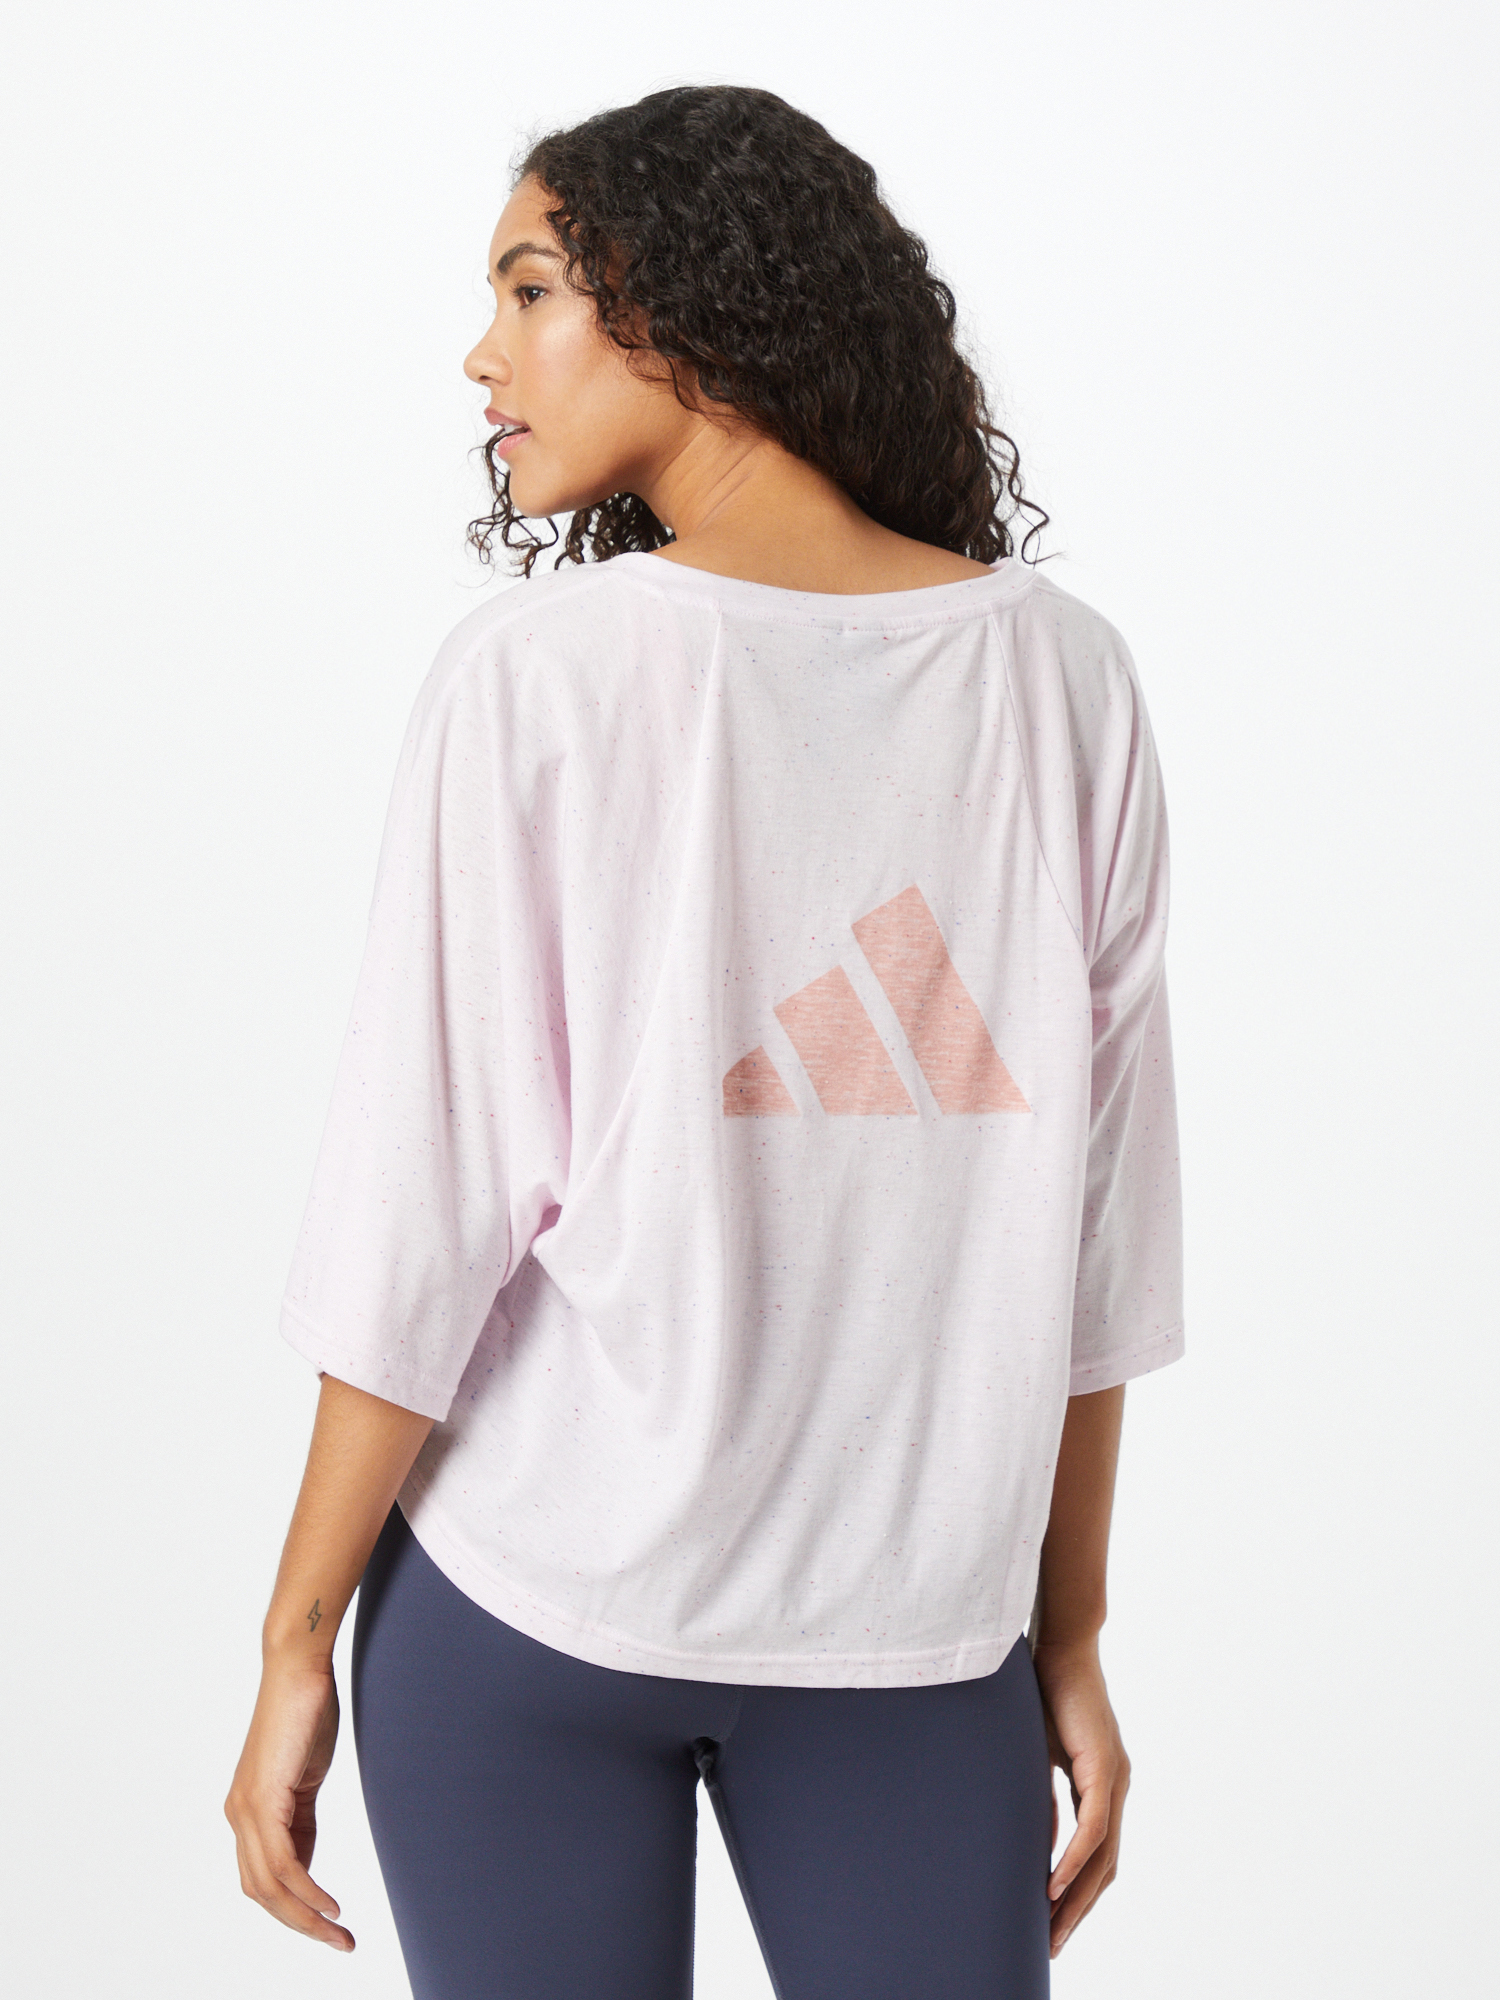 ADIDAS PERFORMANCE Funktionsshirt in Rosa, Hellpink 